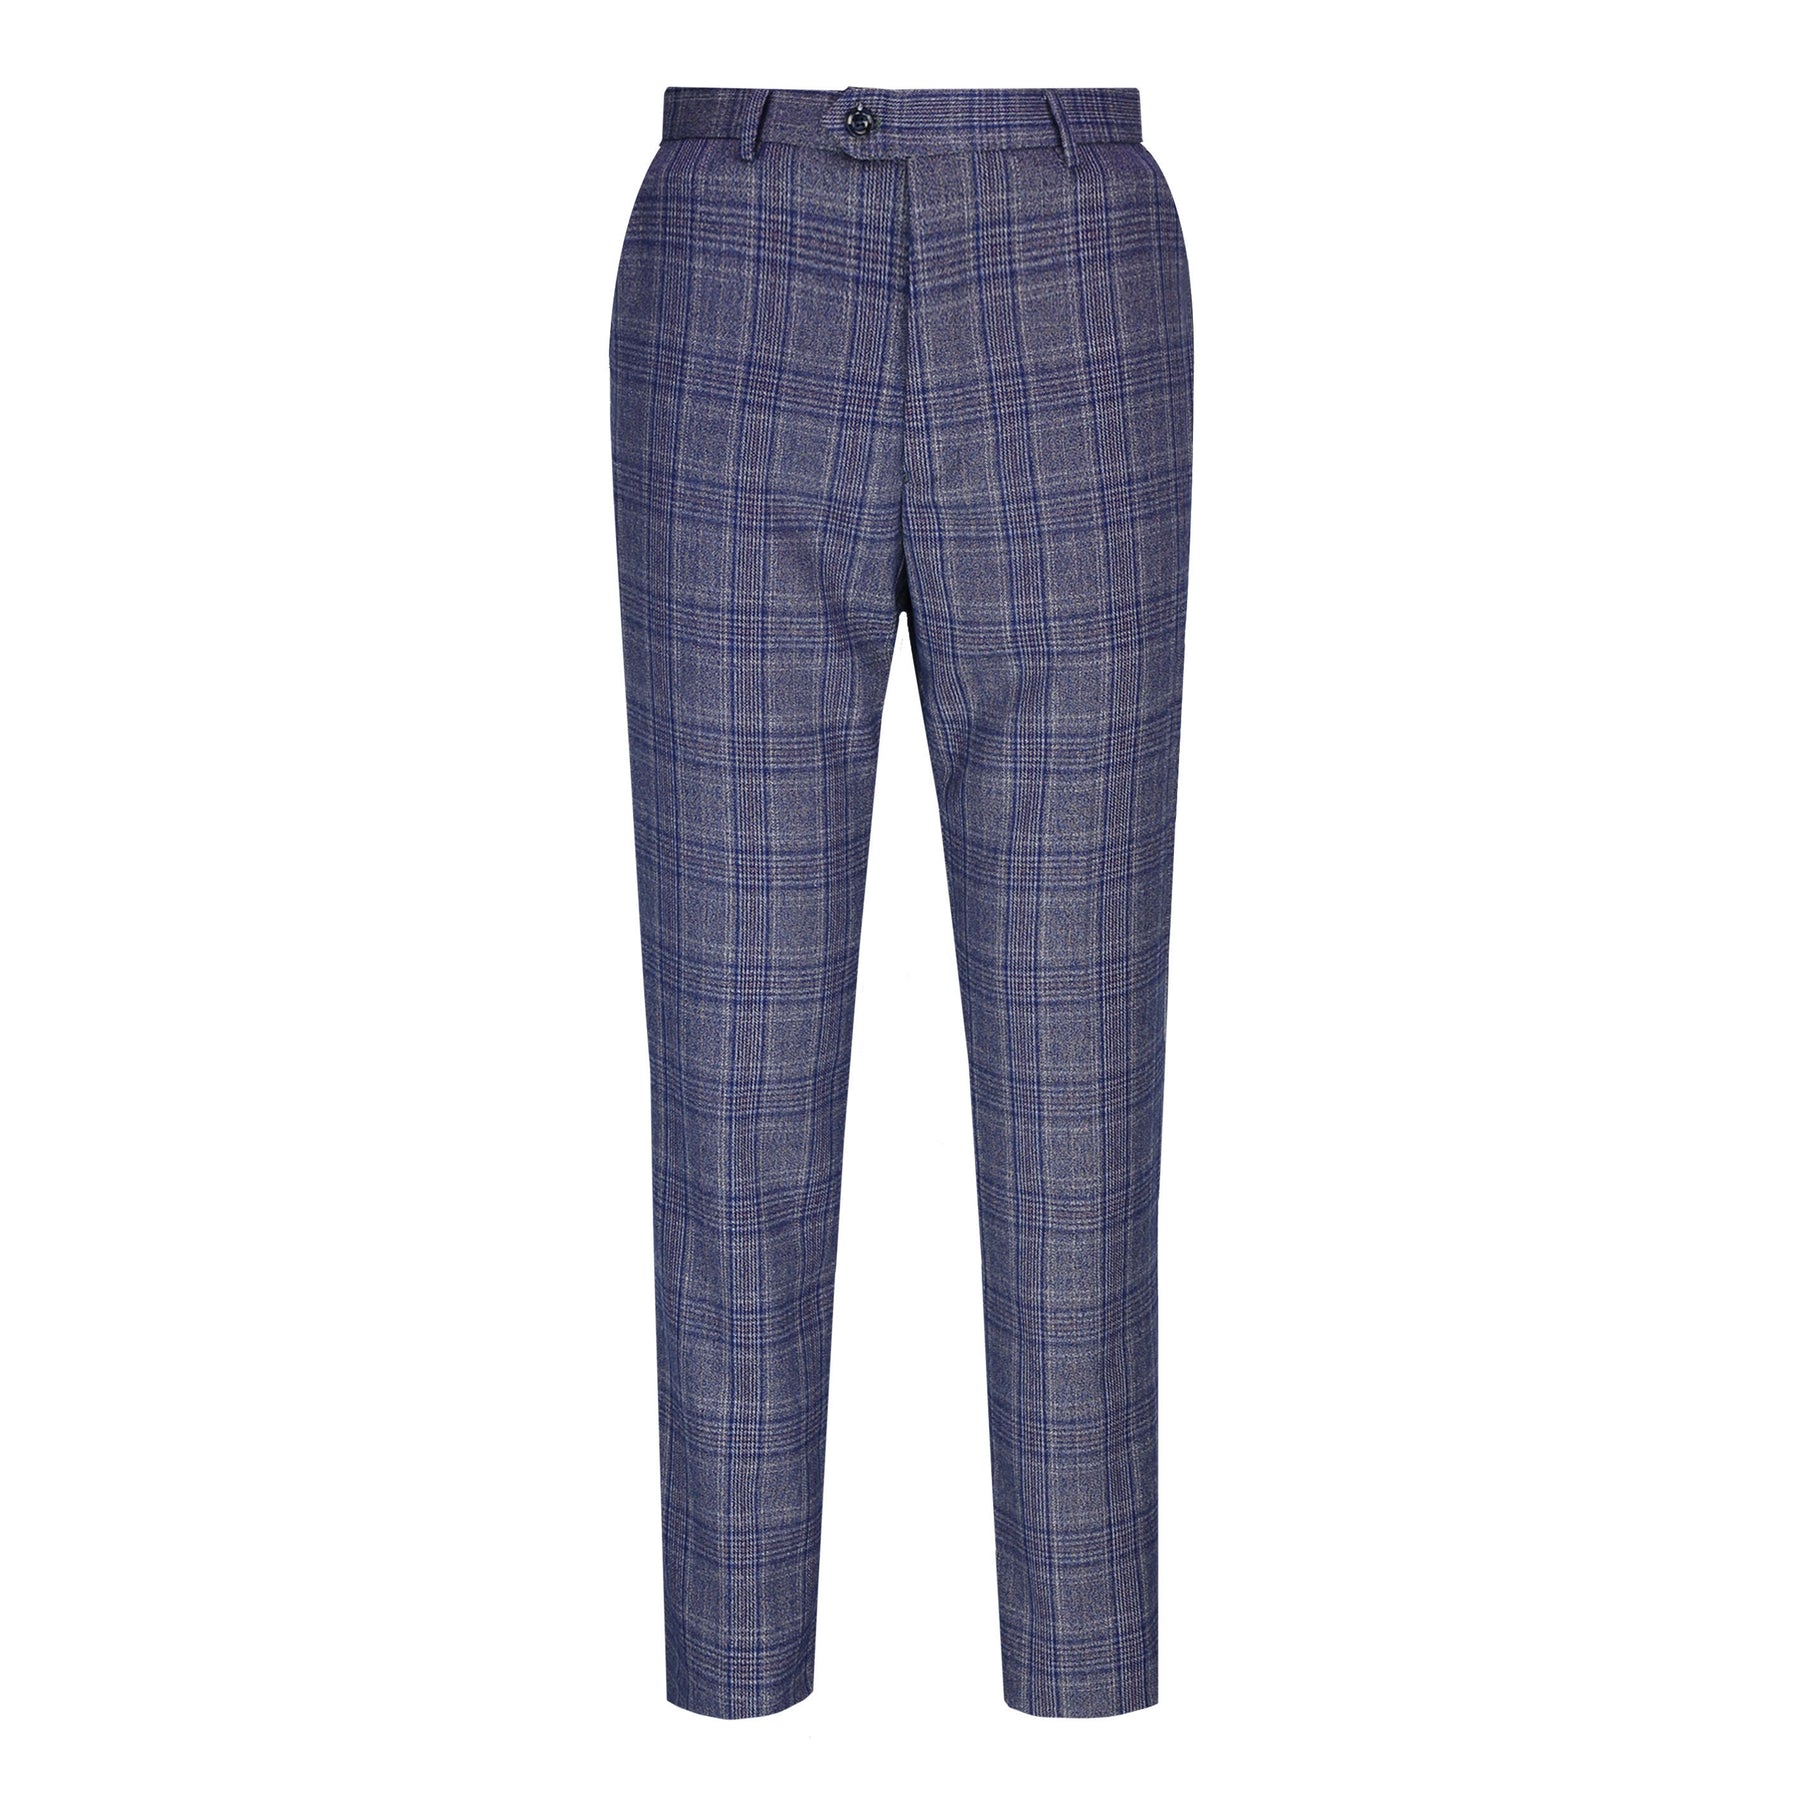 OTIS - TWEED NAVY DOUBLE BREASTED CHECK SUIT – XPOSED